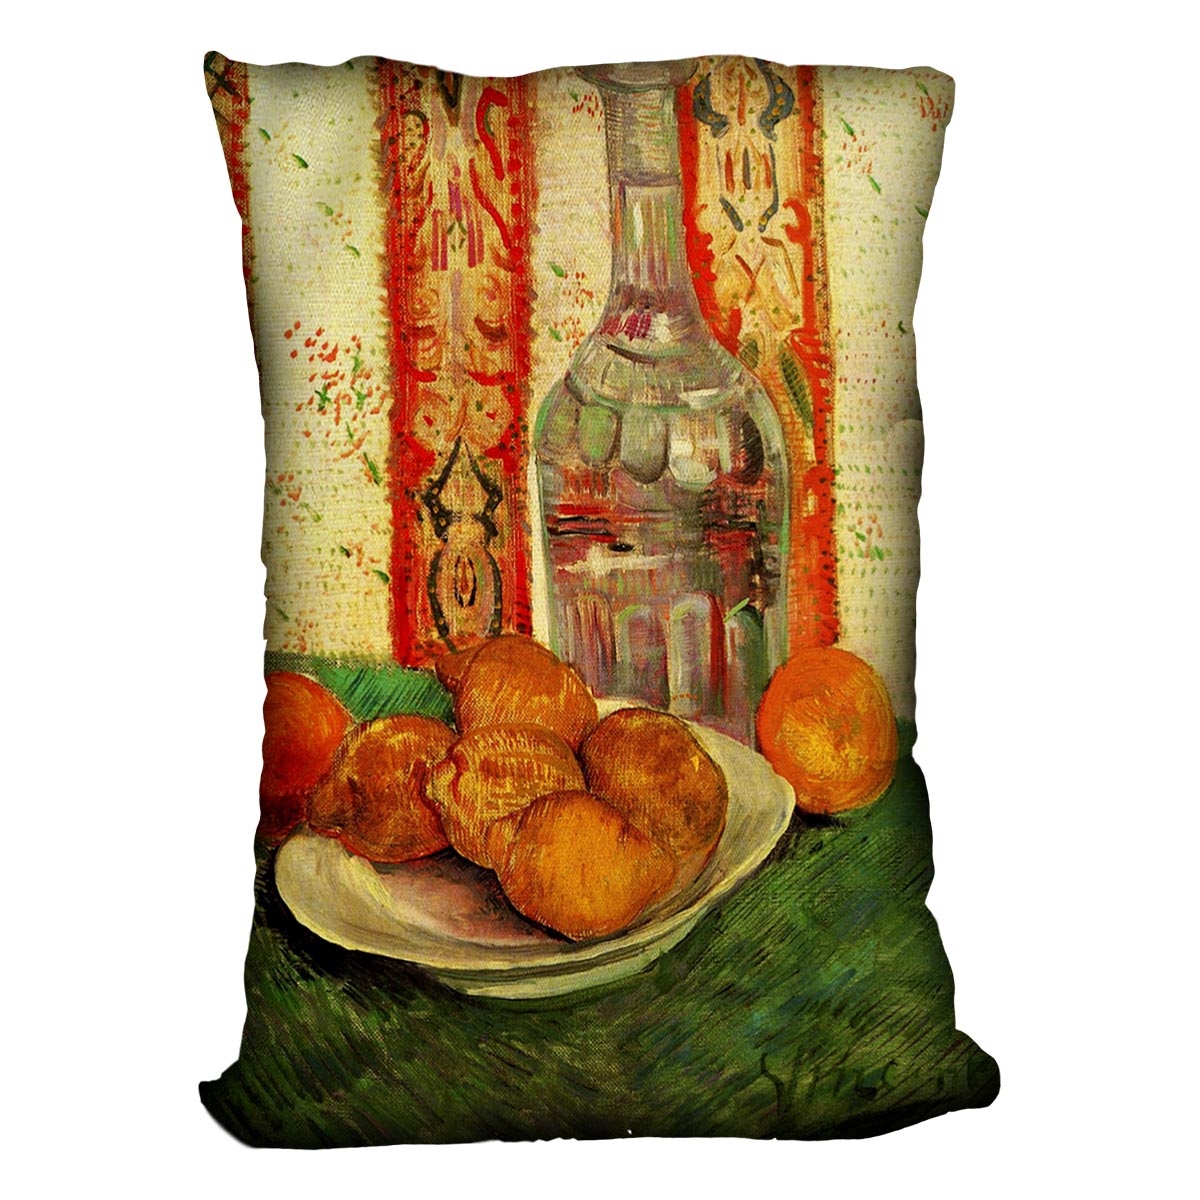 Still Life with Decanter and Lemons on a Plate by Van Gogh Cushion